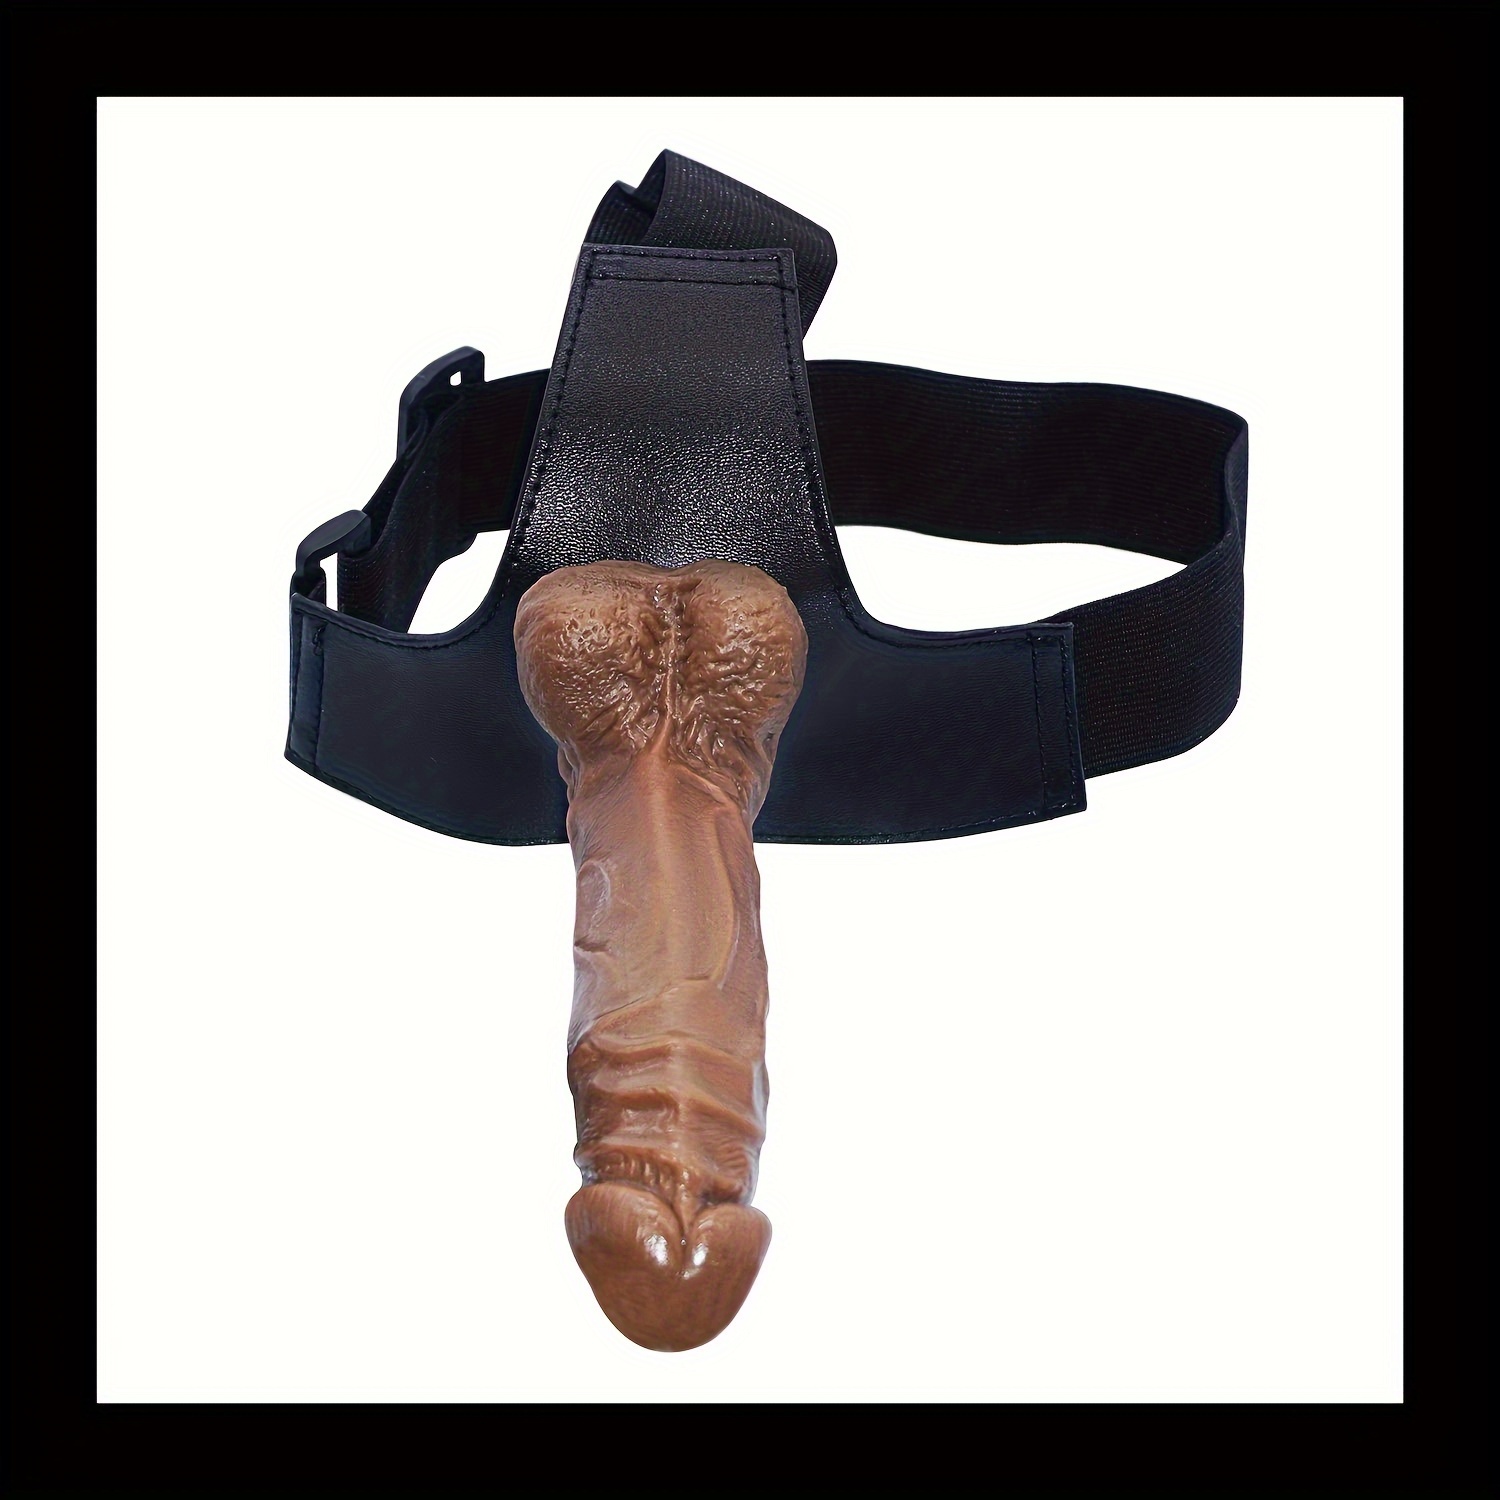 Unisex Brown Strap On Dildo For Adult Sex Toys in Ajah - Sexual